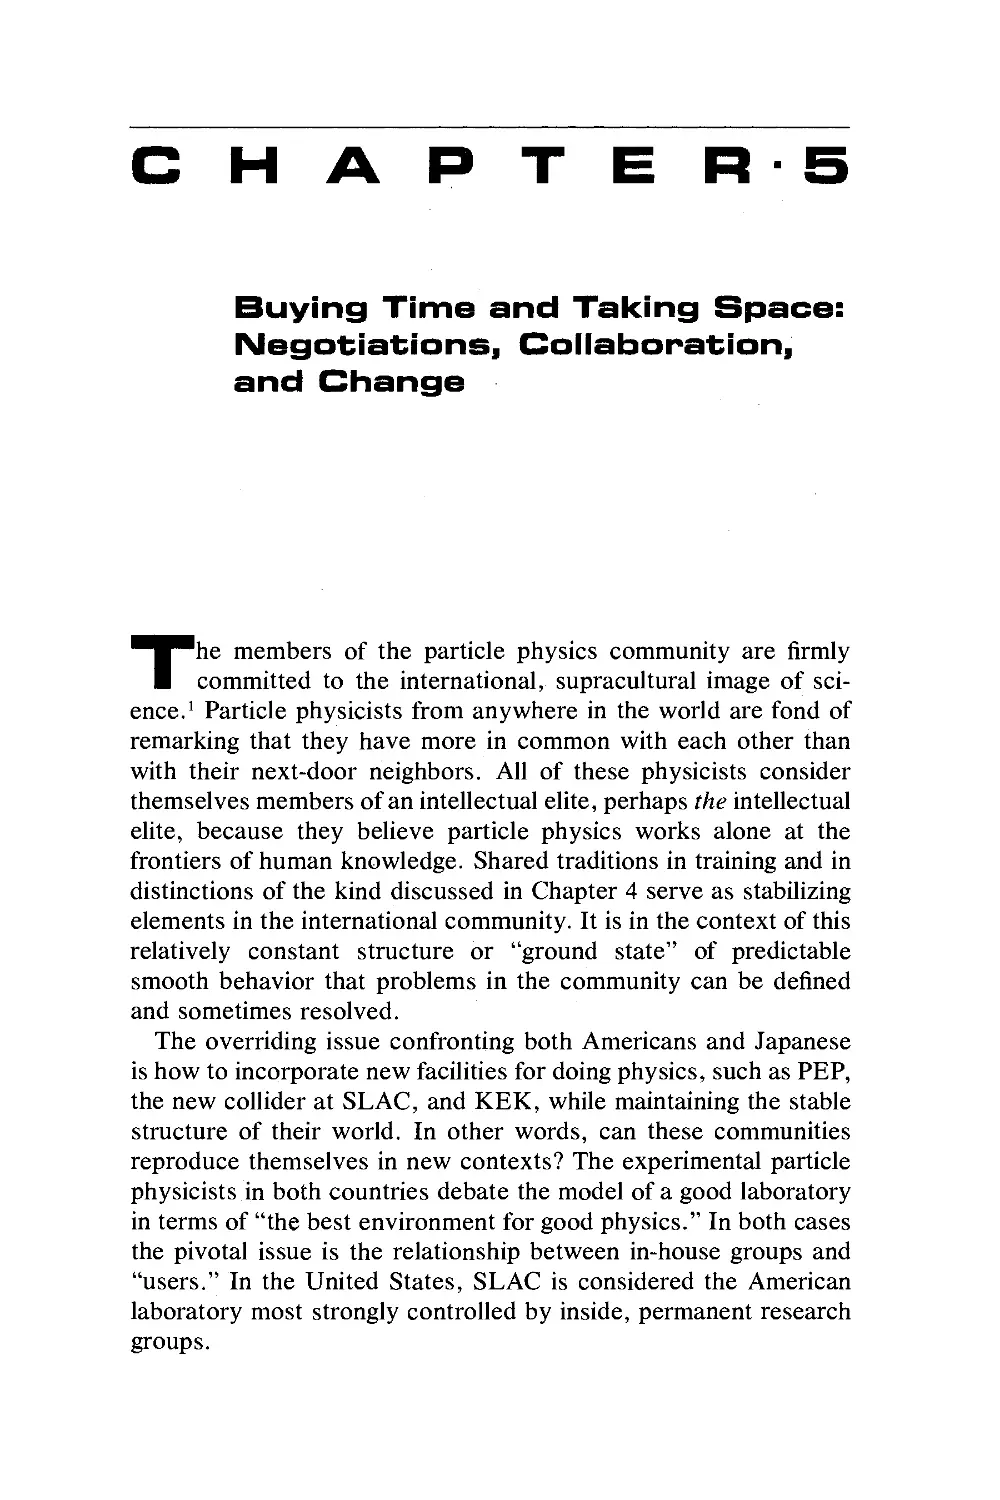 5 Buying Time and Taking Space: Negotiations, Collaboration, and Change